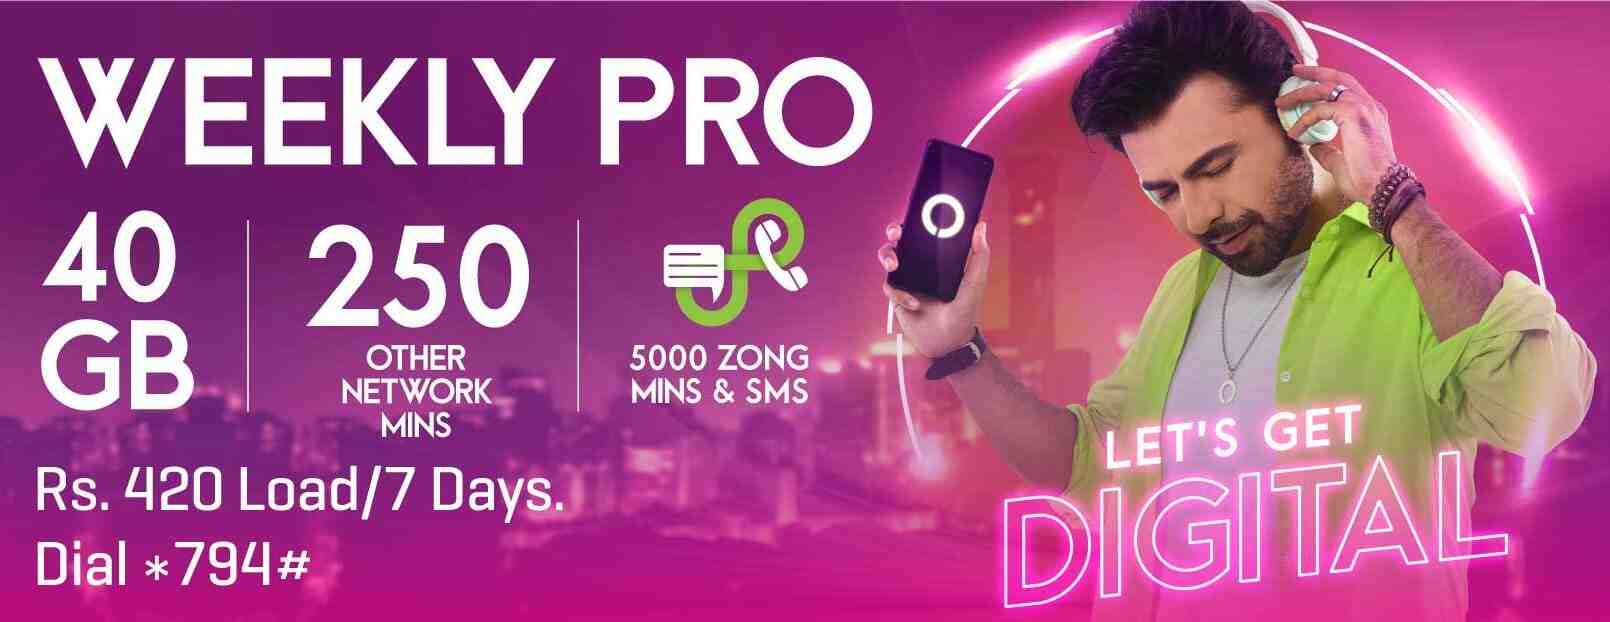 Zong Weekly Pro Code and details